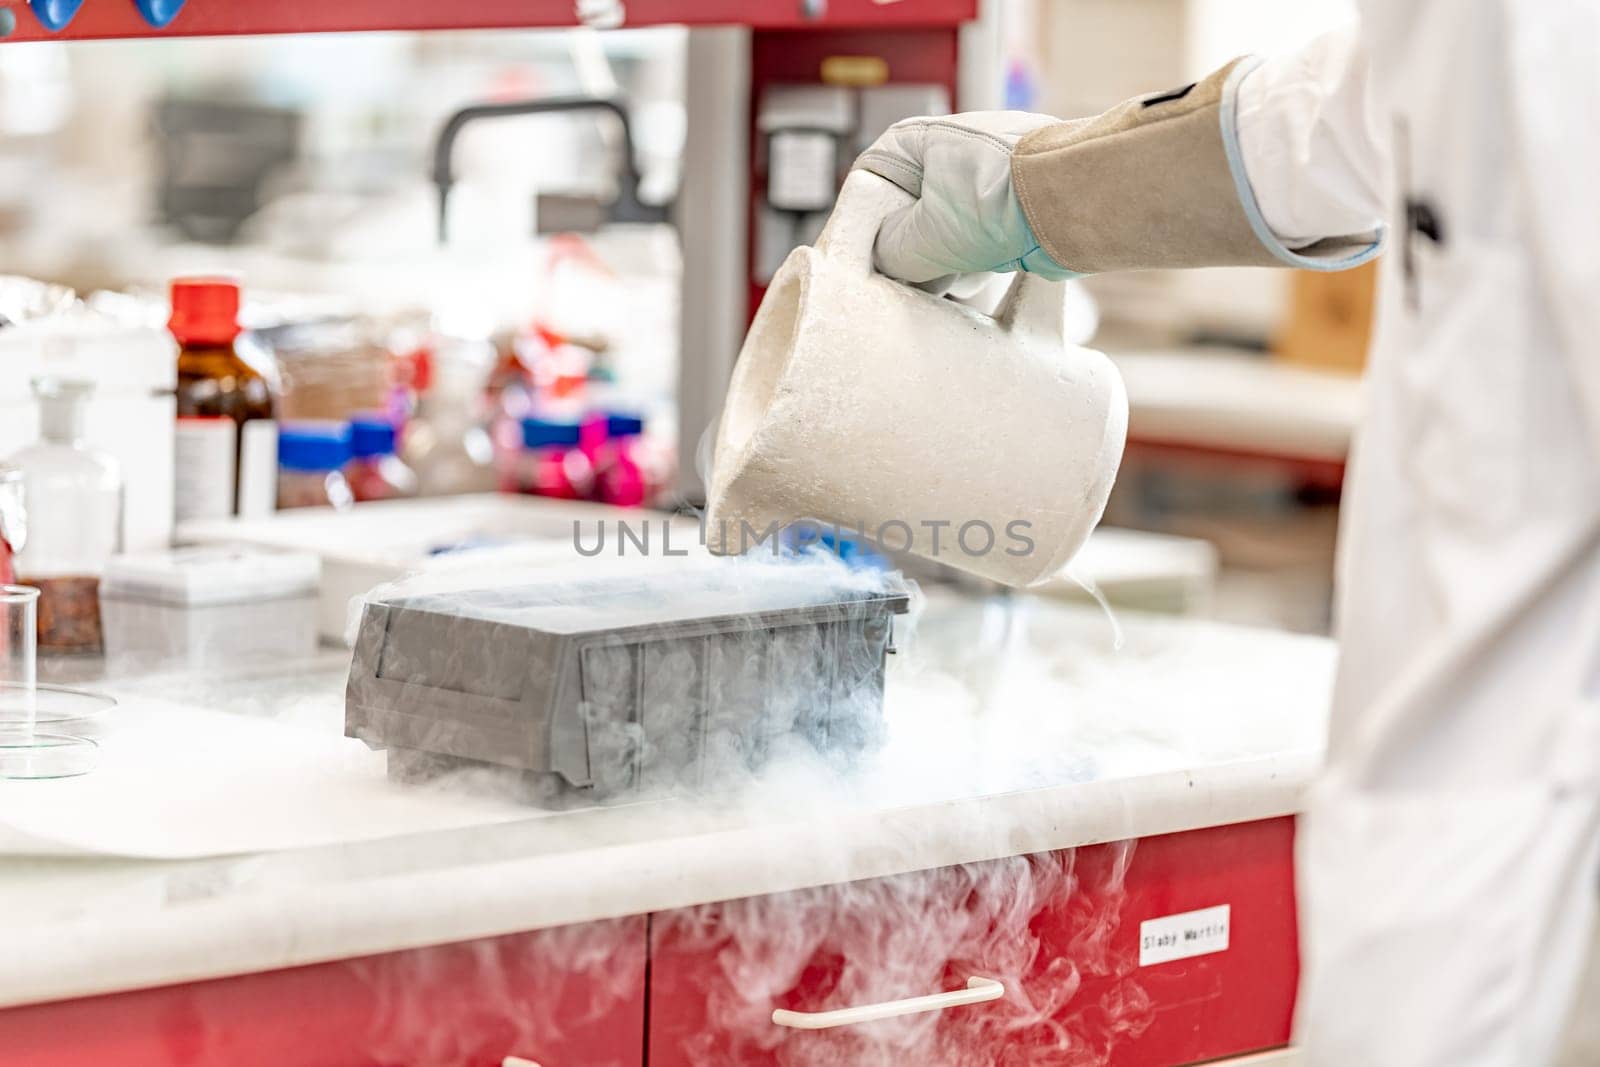 experiments with liquid nitrogen in the chemical laboratory. work and research with extreme temperatures by Edophoto